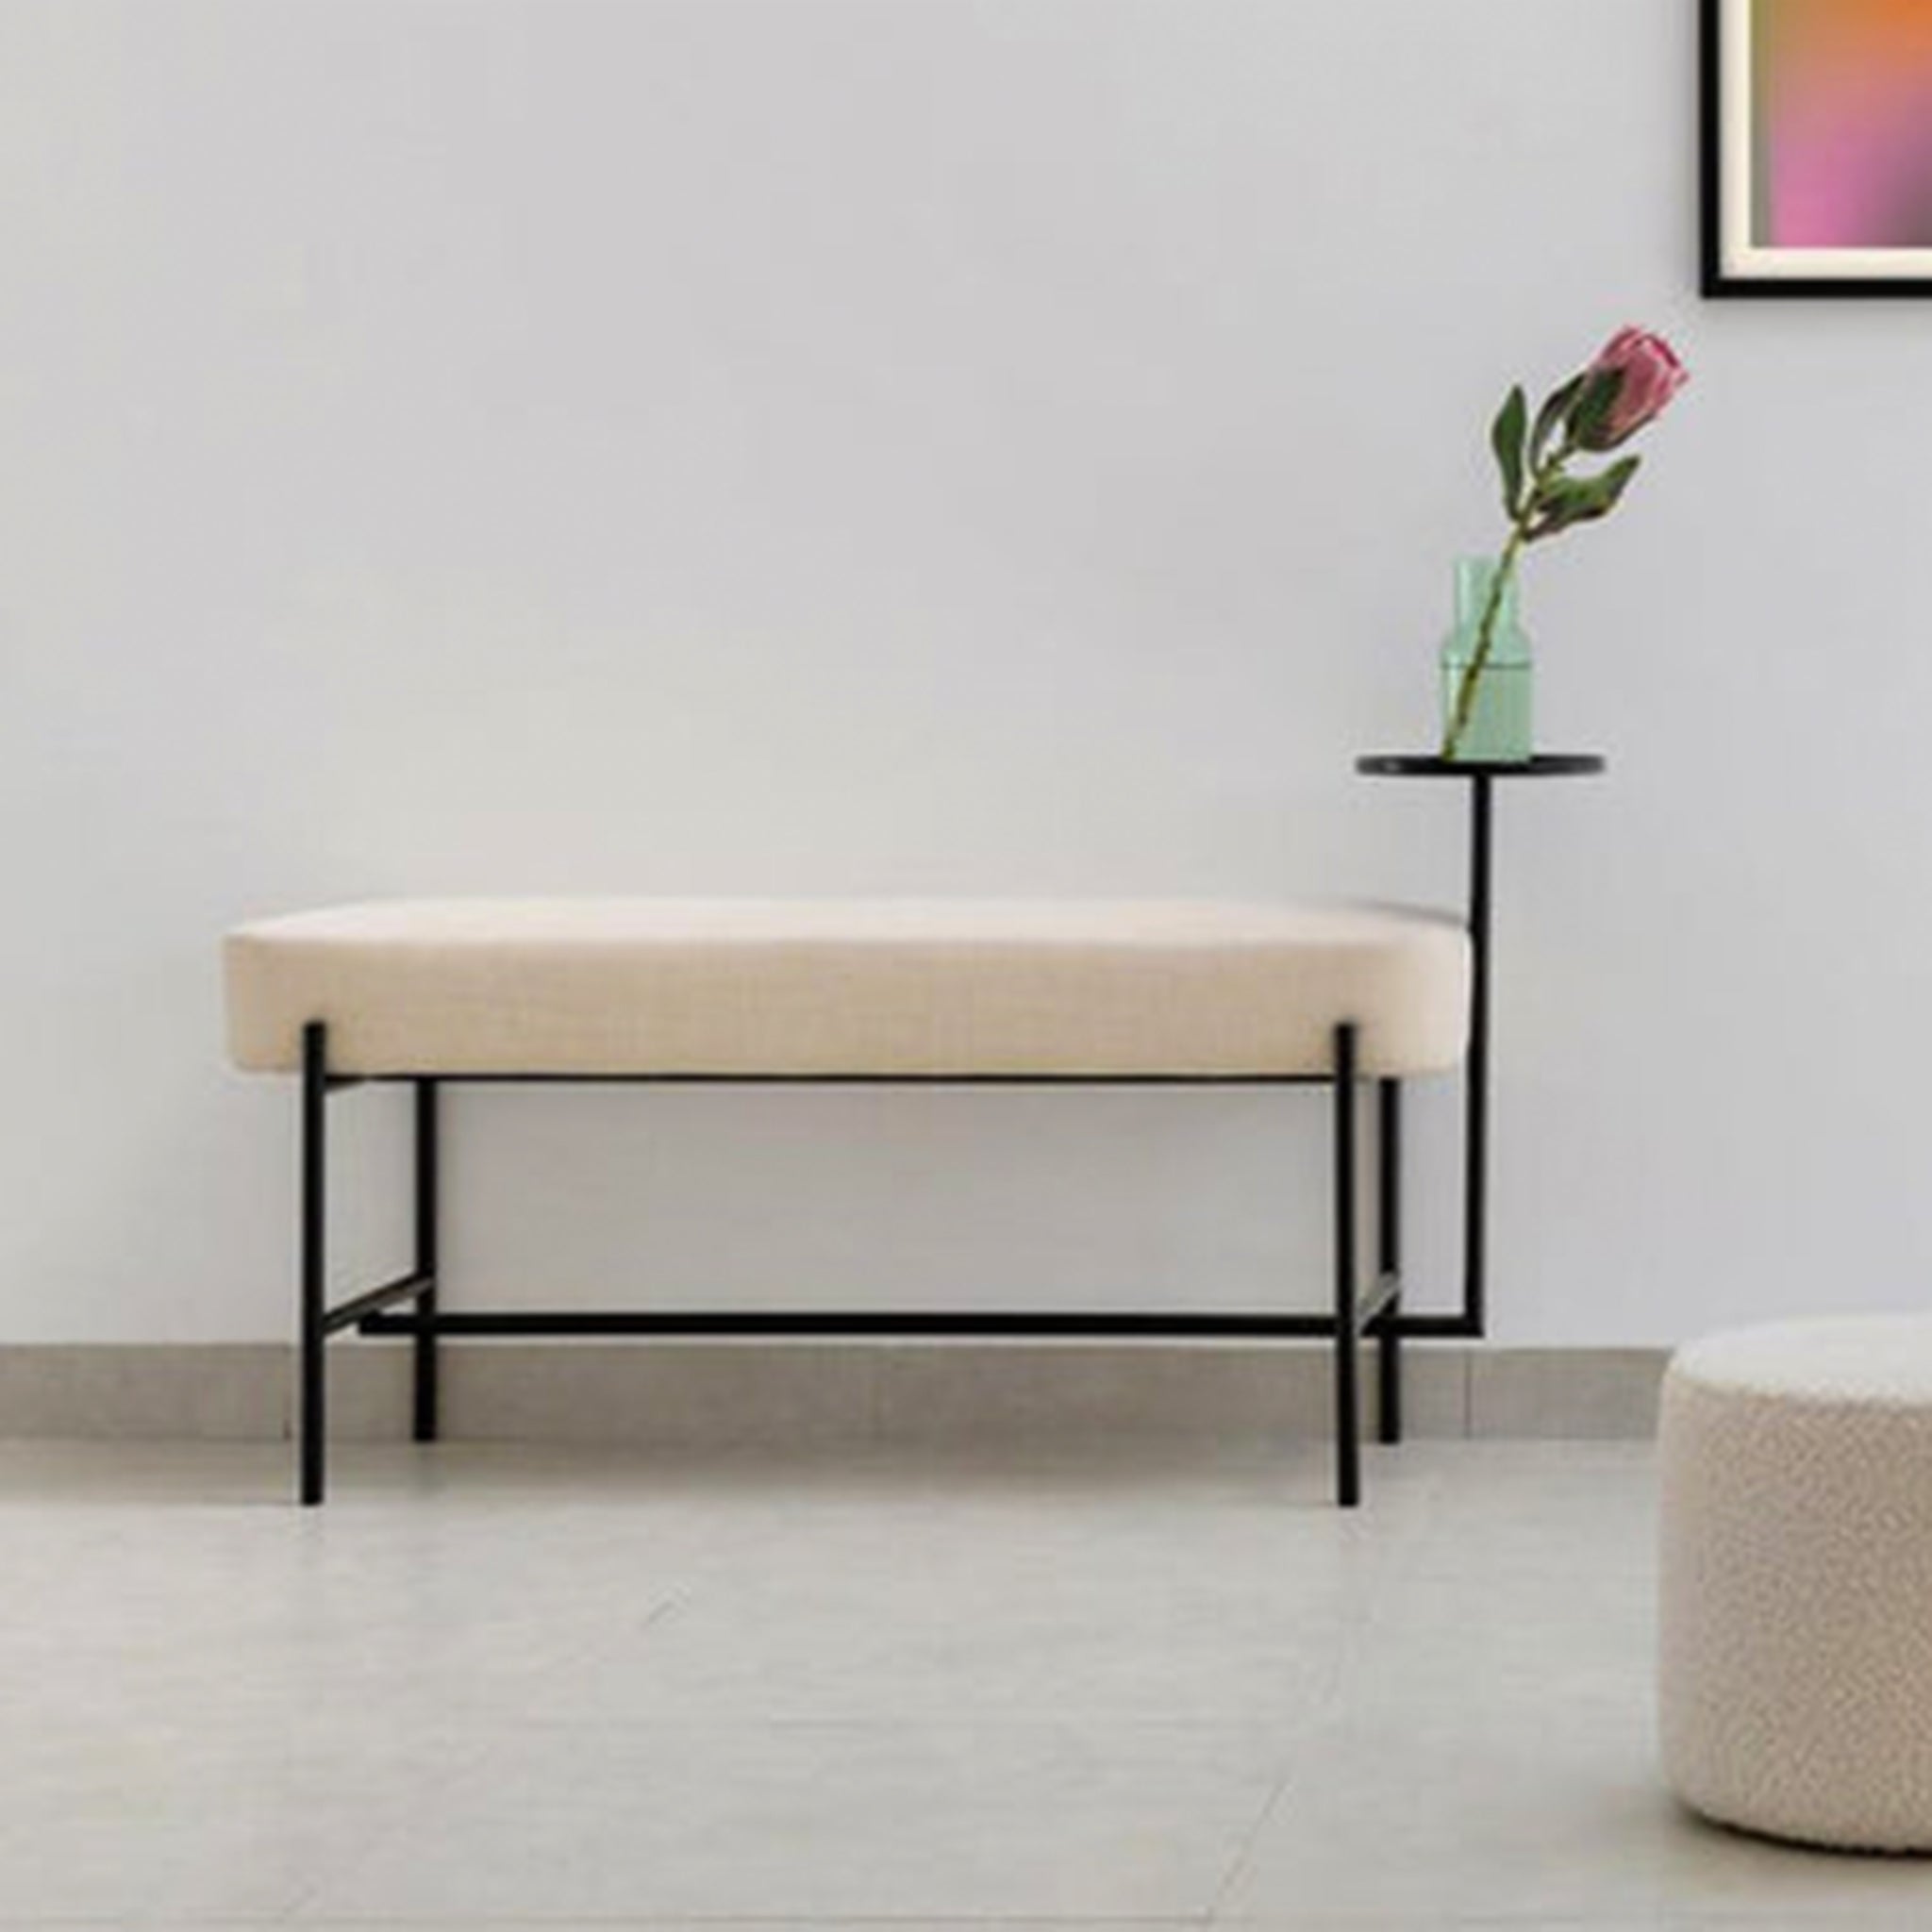 Modern bench with a beige upholstered seat and a matte black powder-coated steel frame, featuring an attached flat side table with a single rose in a glass vase, placed in a minimalist room